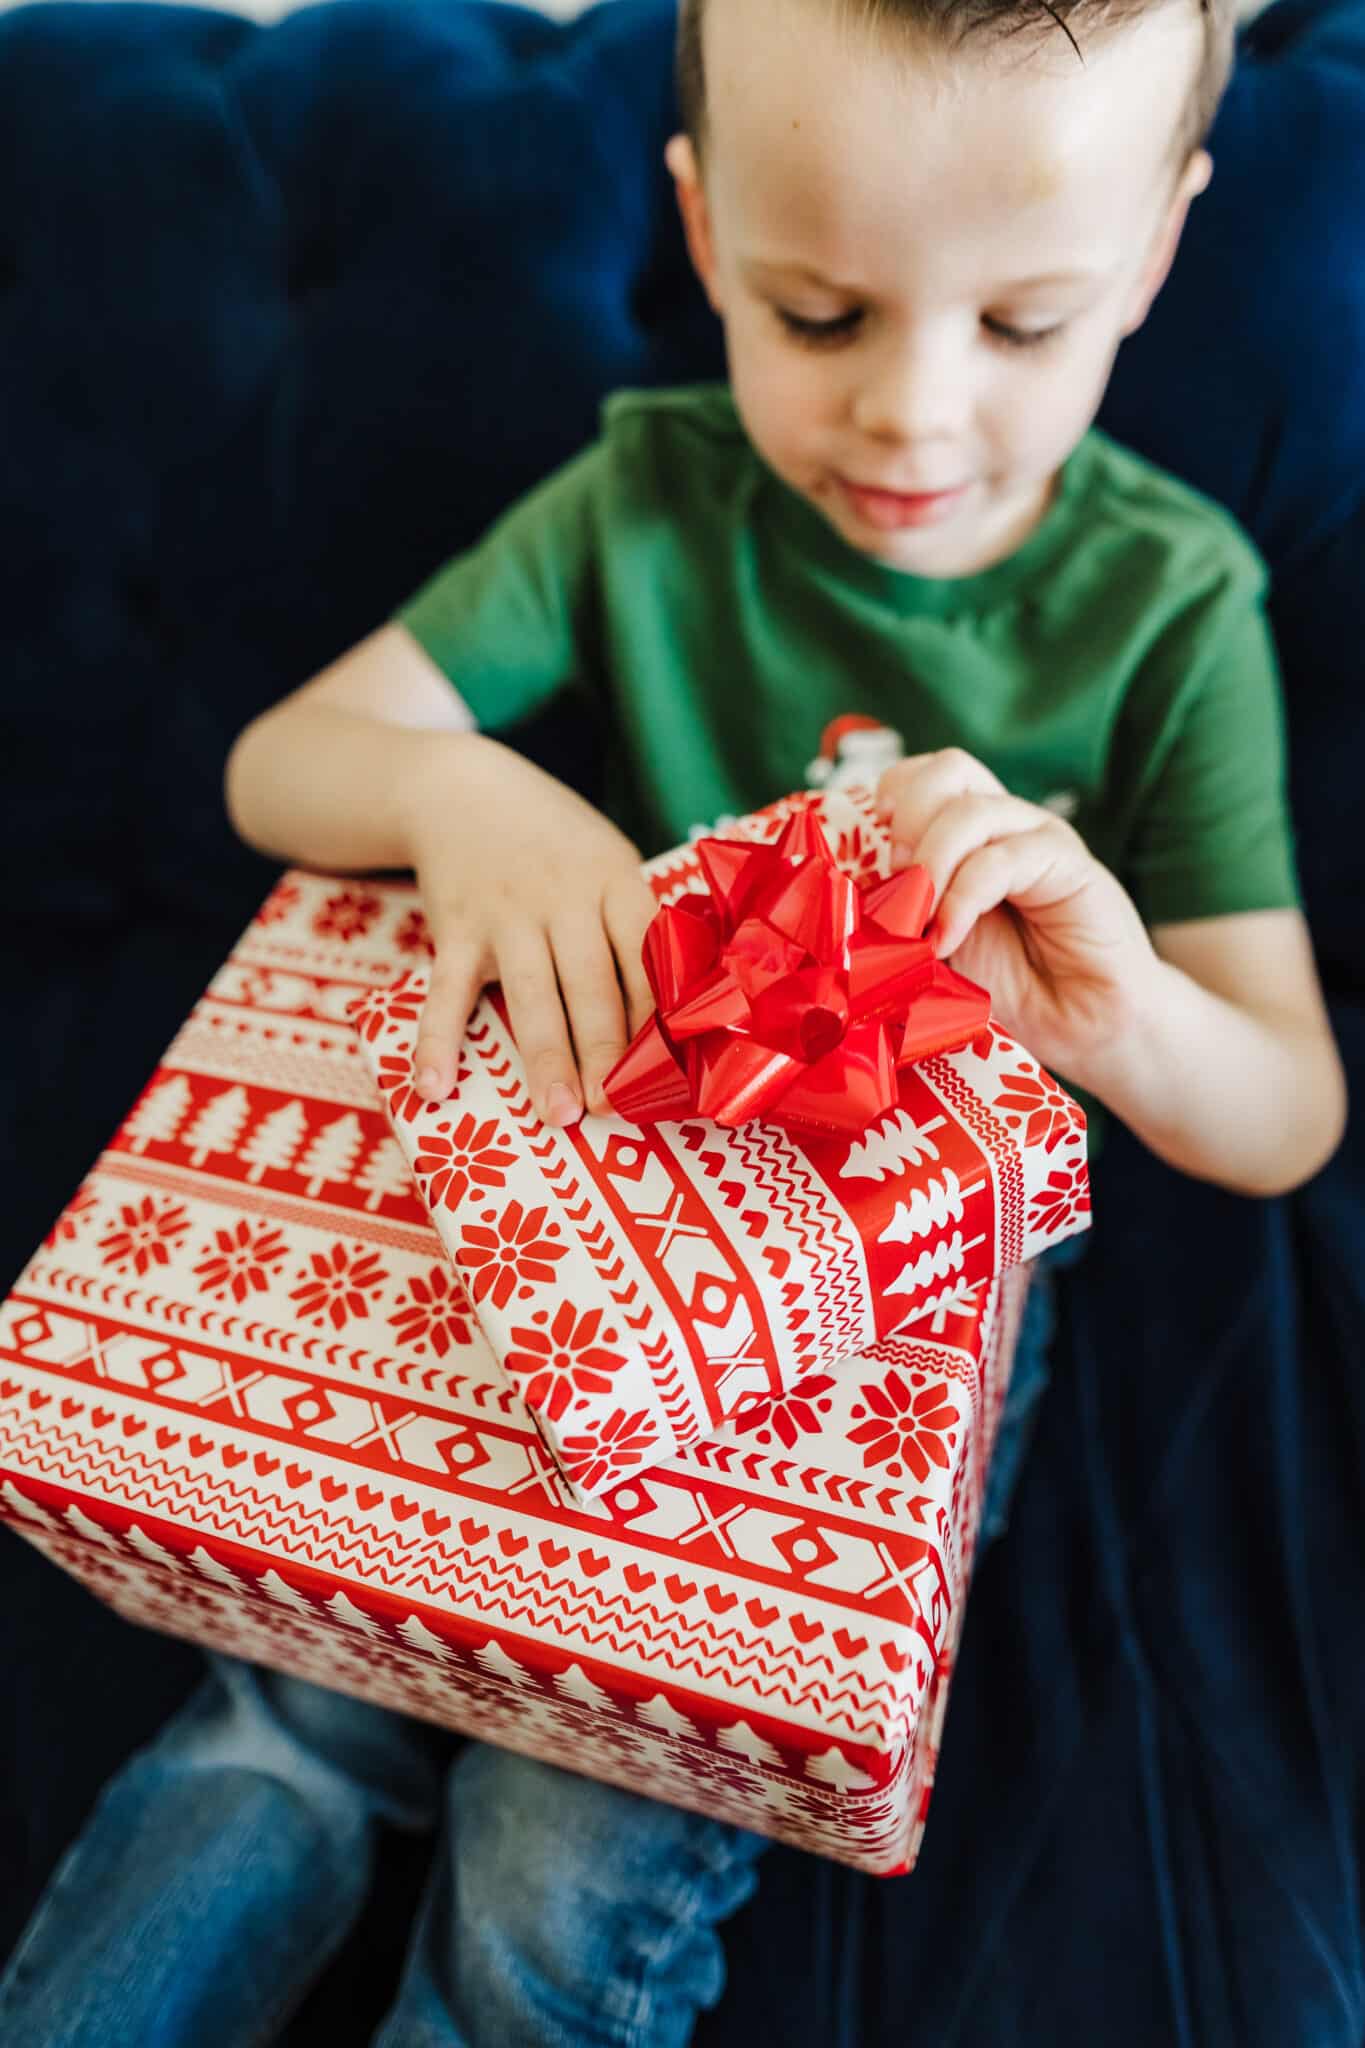 The Best Gifts for 4 Year Olds